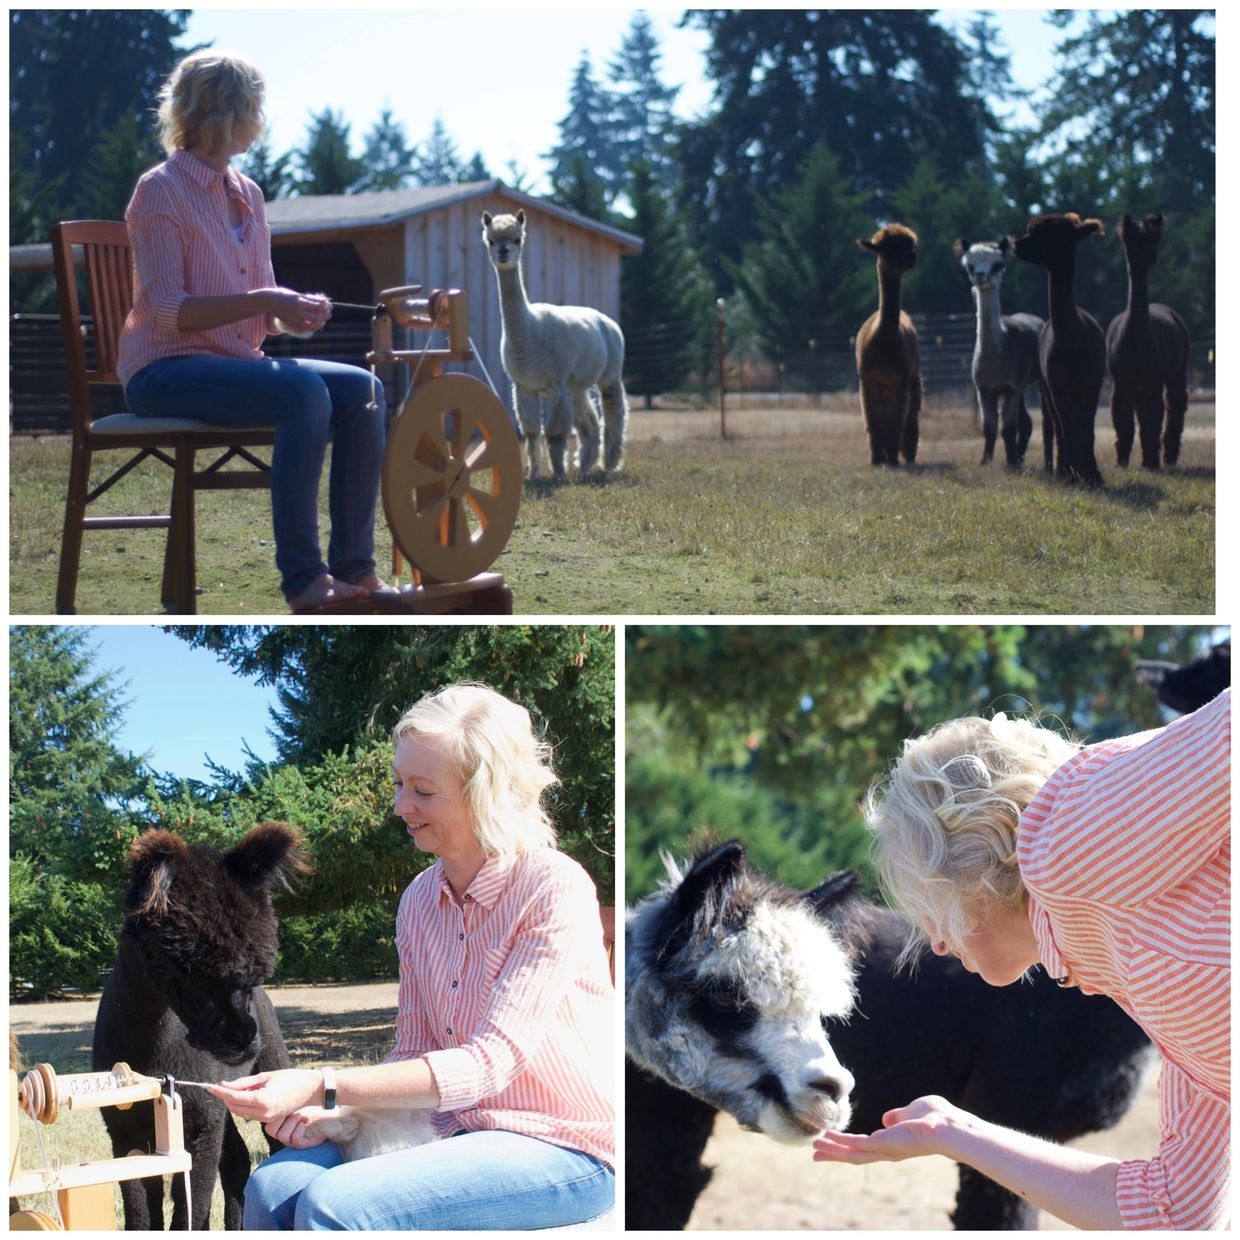 Collage of 3 pictures of a woman at a spinning wheel in a field with alpacas watching